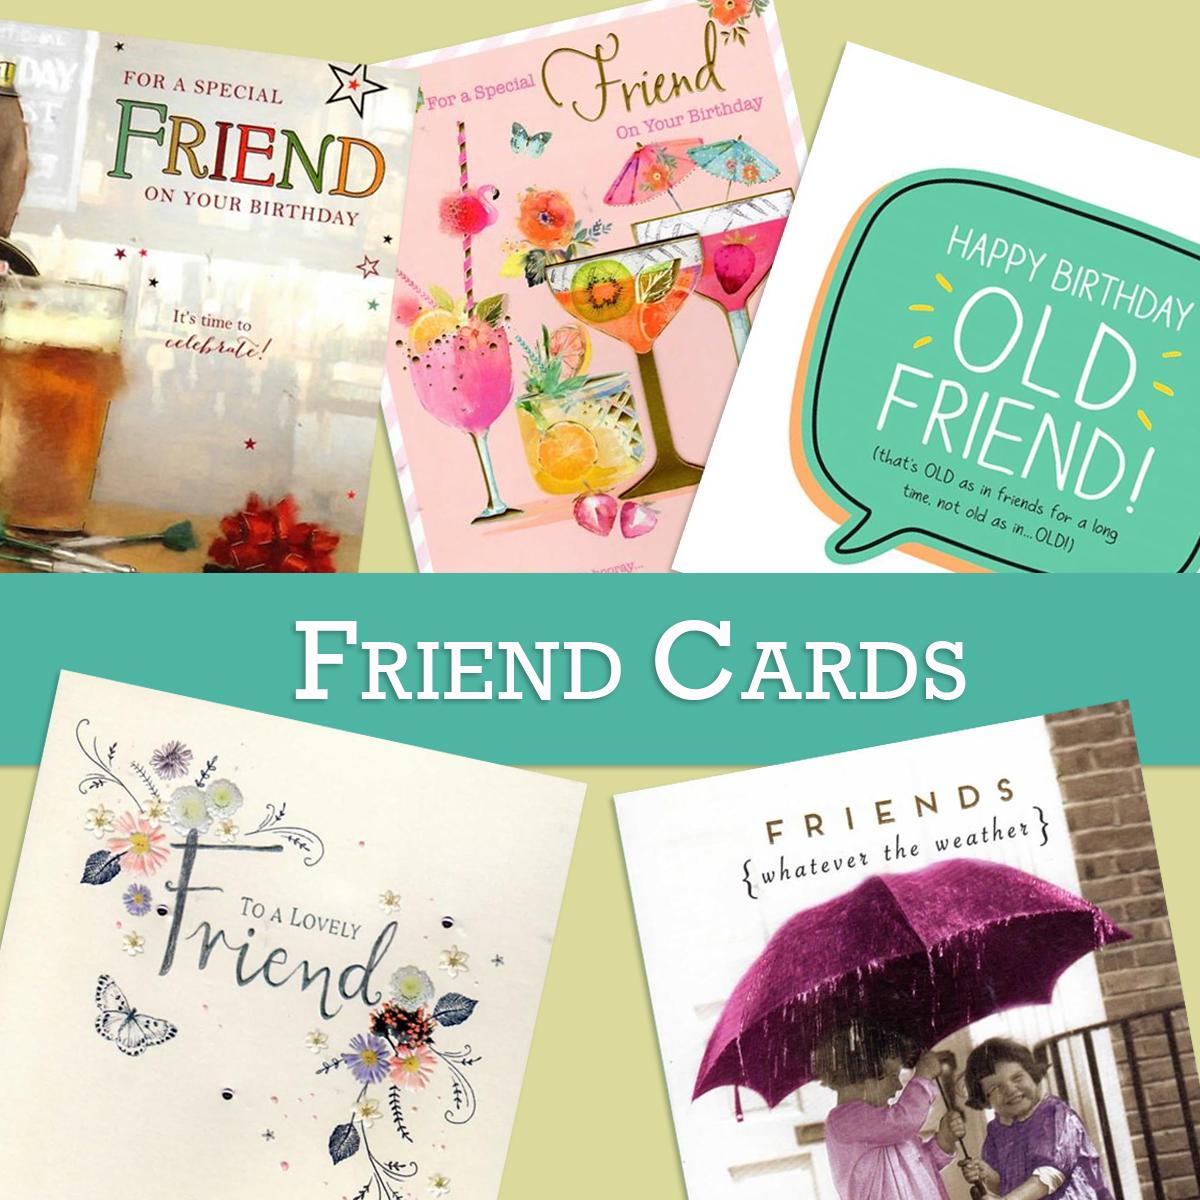 A Selection Of Cards To Show The Depth Of Range In Our Friend Birthday Section